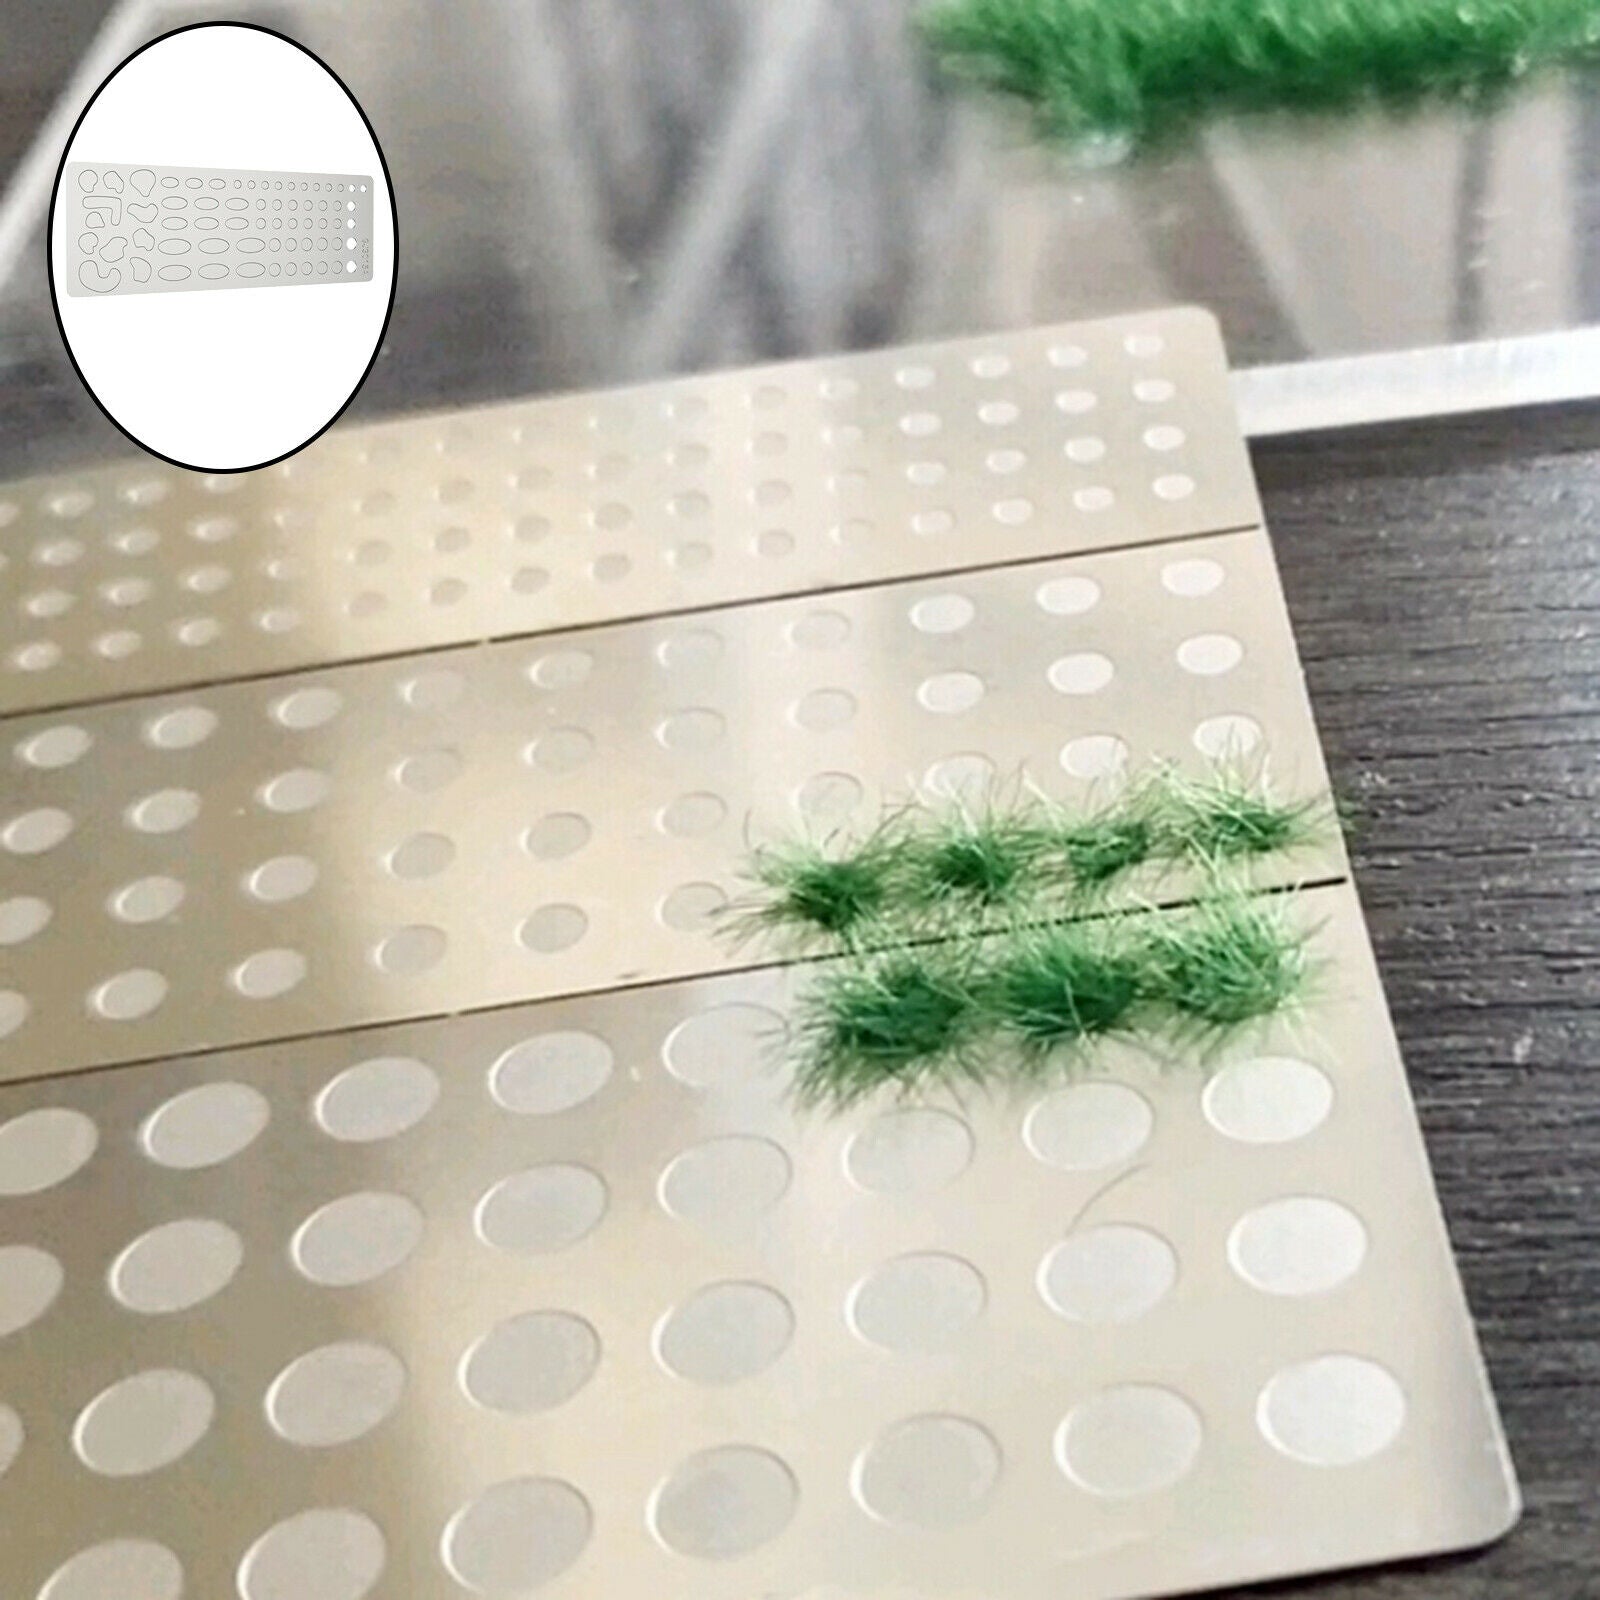 Handcrafted Grass Planting Template Tool Plate Accessories Railroad Scenery